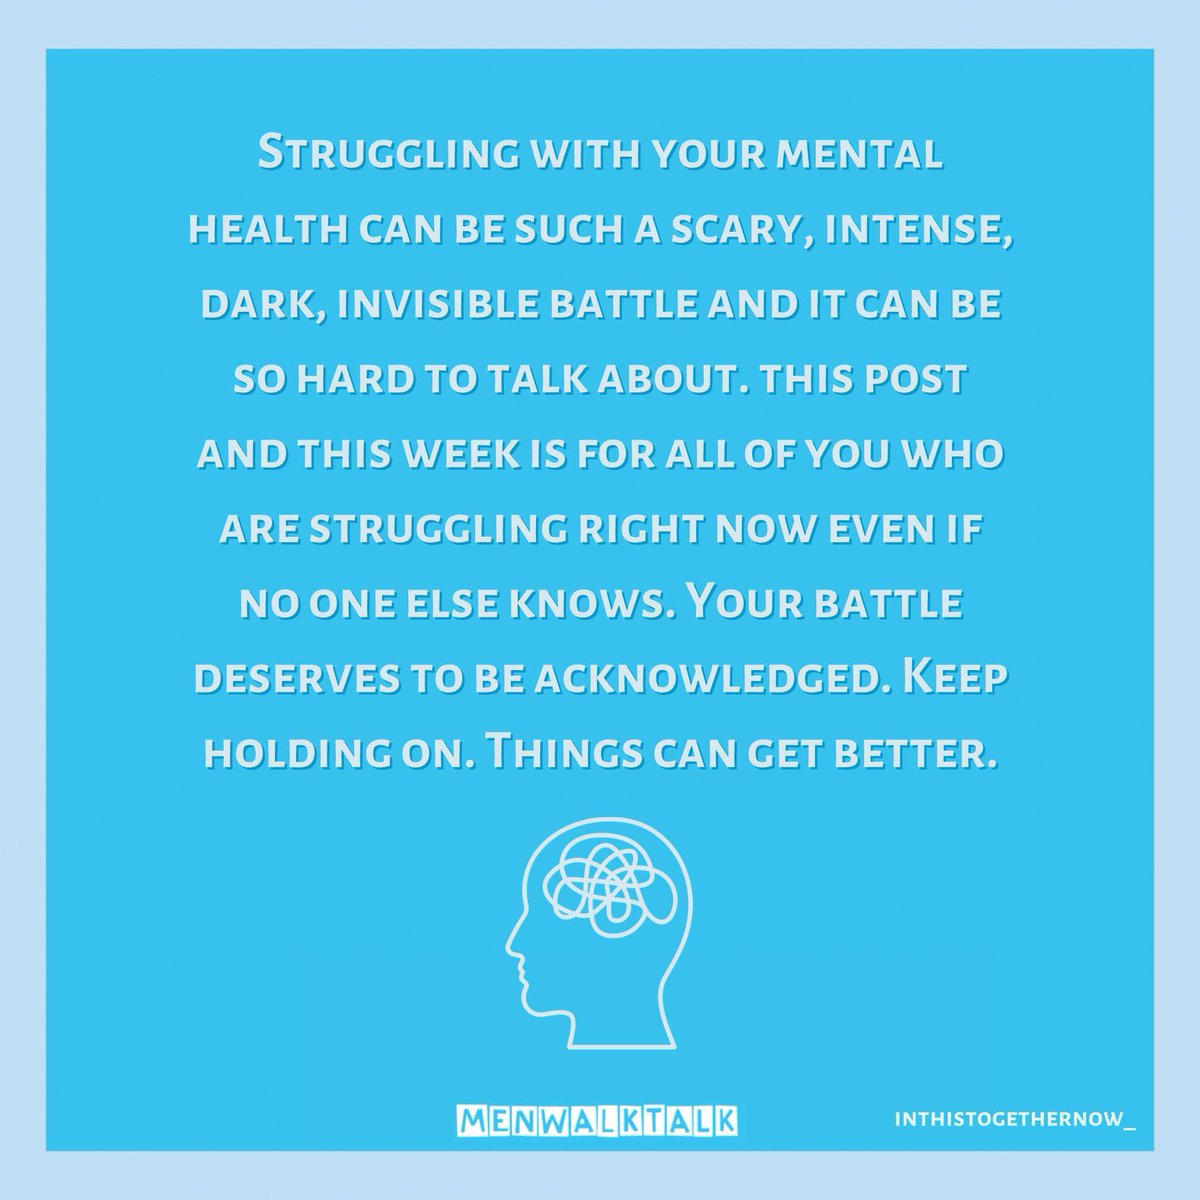 This is for anyone struggling right now. We see you. 

#mentalhealthweek #mentalhealth #mentalhealthawareness #mentalhealthmatters #mentalhealthadvocate #mentalhealthsupport #mentalhealthmonth #mentalhealthday #mentalhealthawarenessmonth #mentalhealthawarenessweek